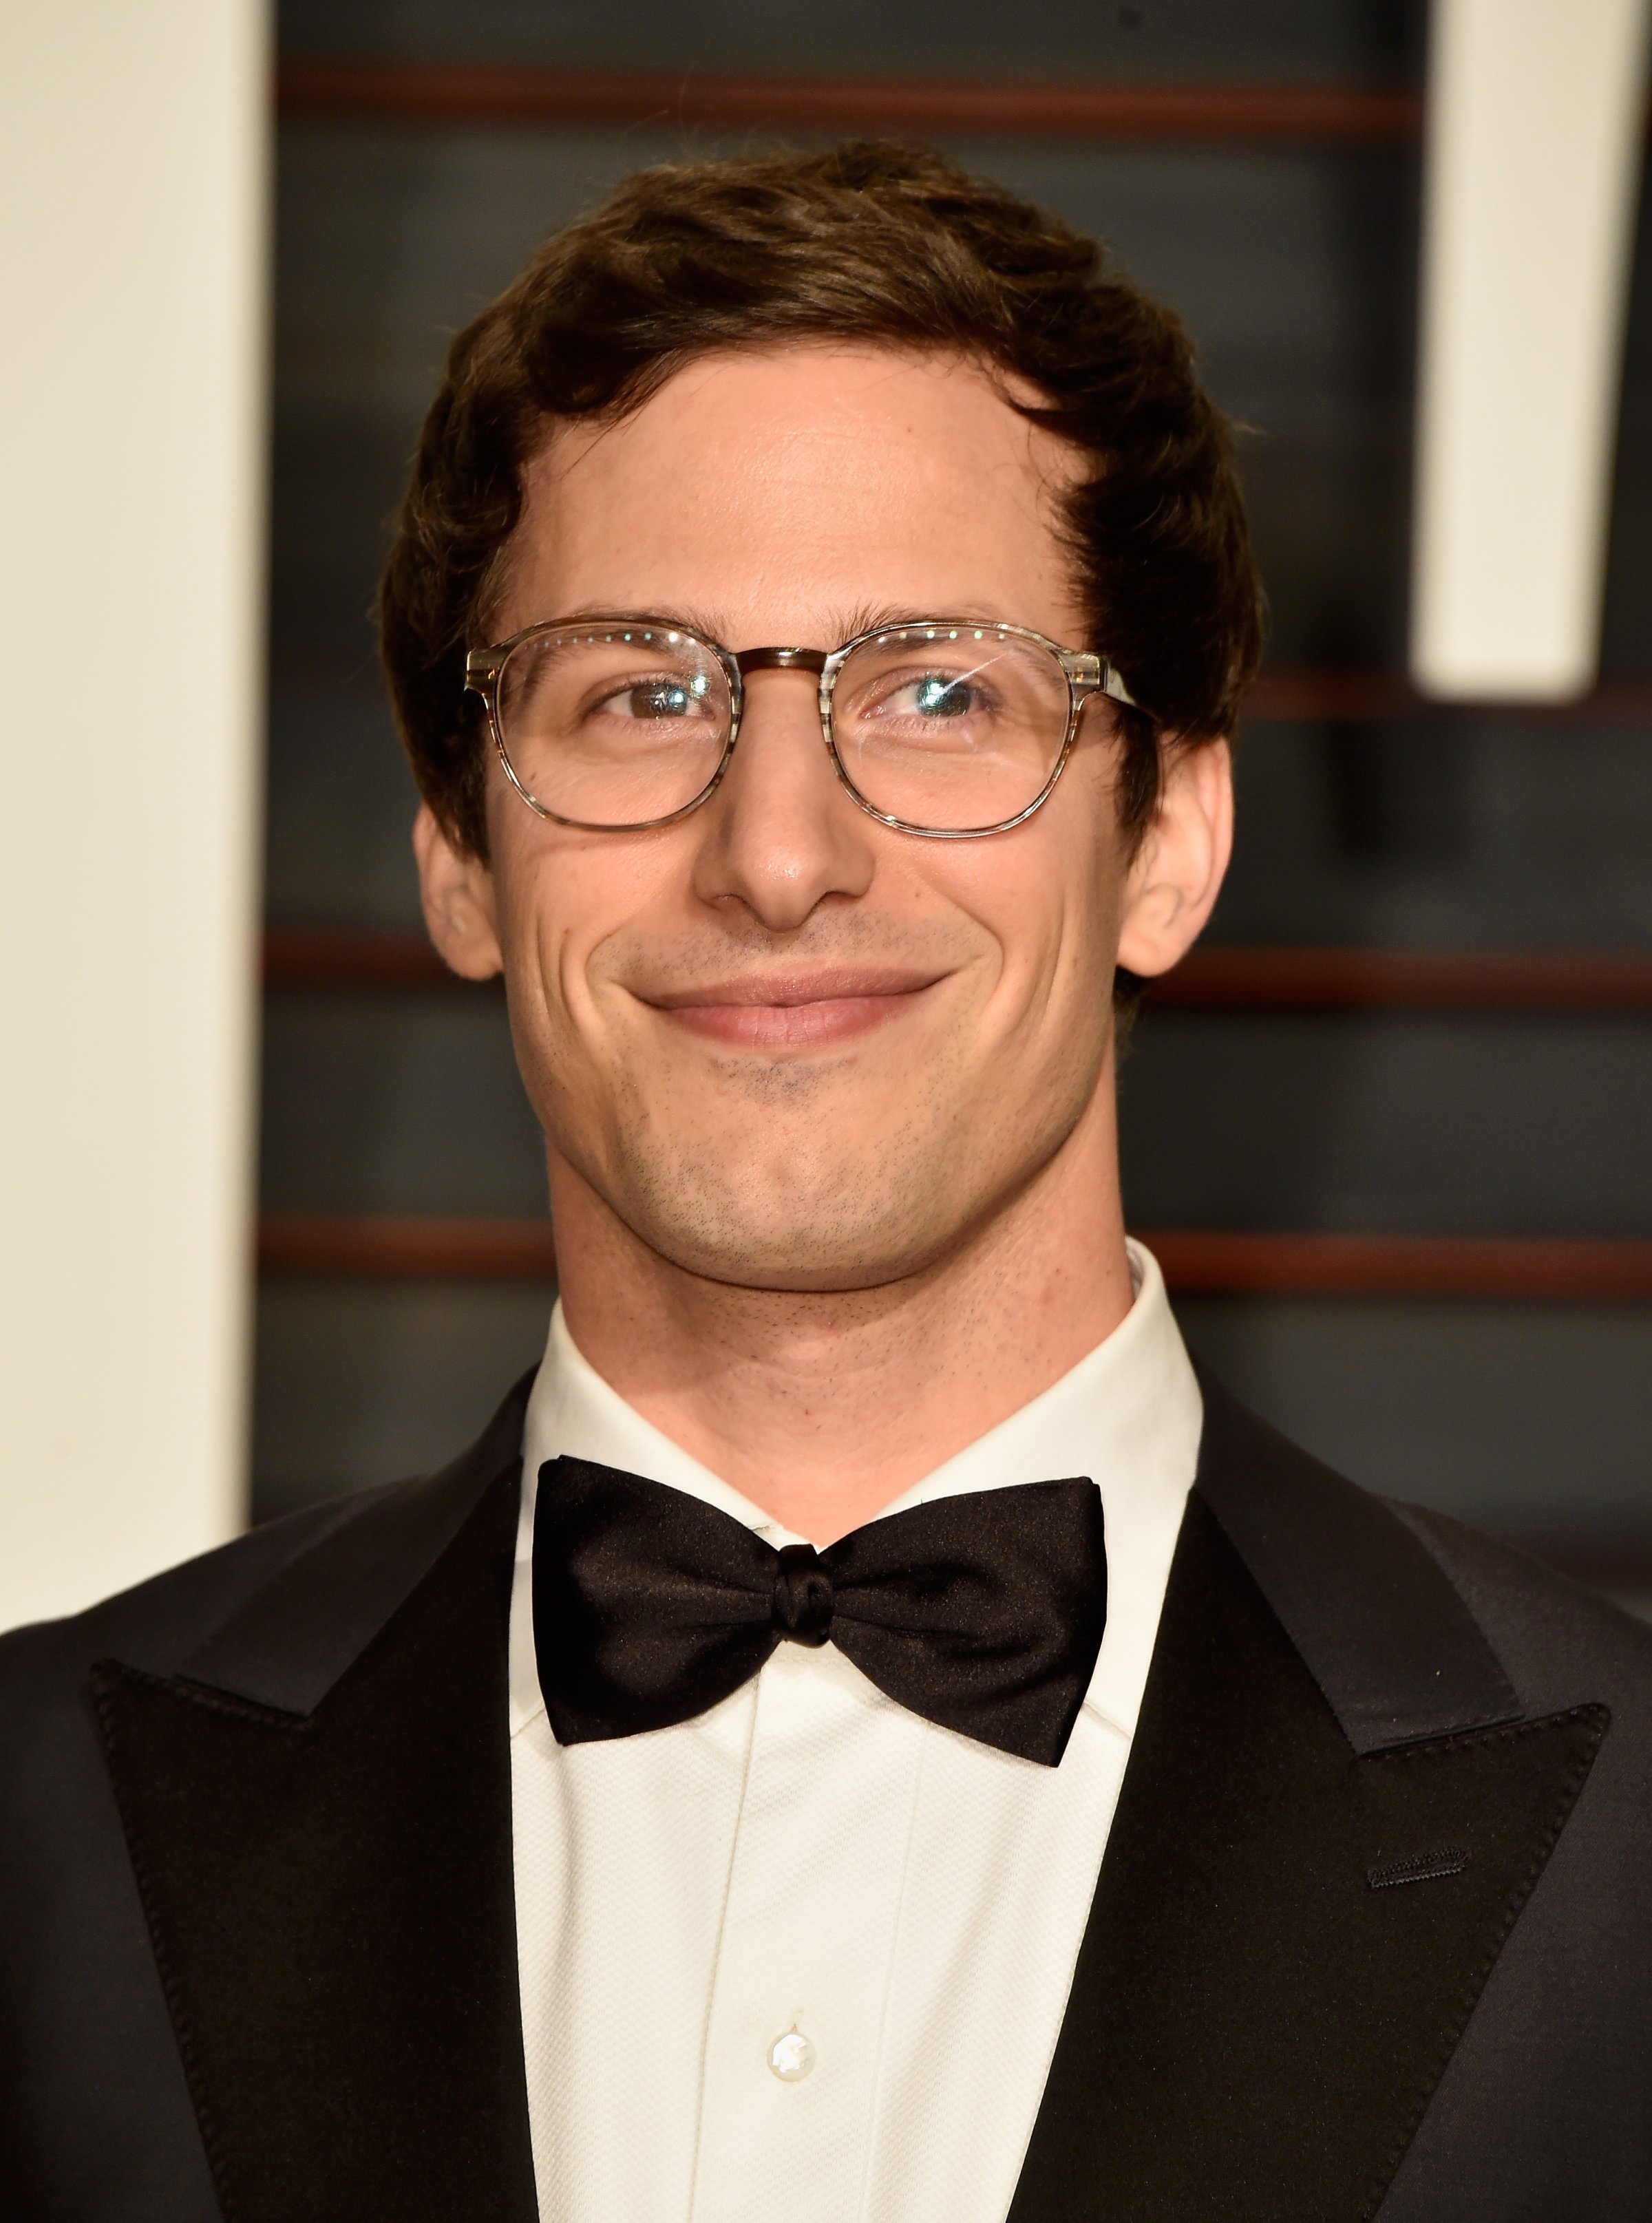 Andy Samberg attends the 2015 Vanity Fair Oscar Party in Beverly Hills, Calif. on Feb. 22, 2015.